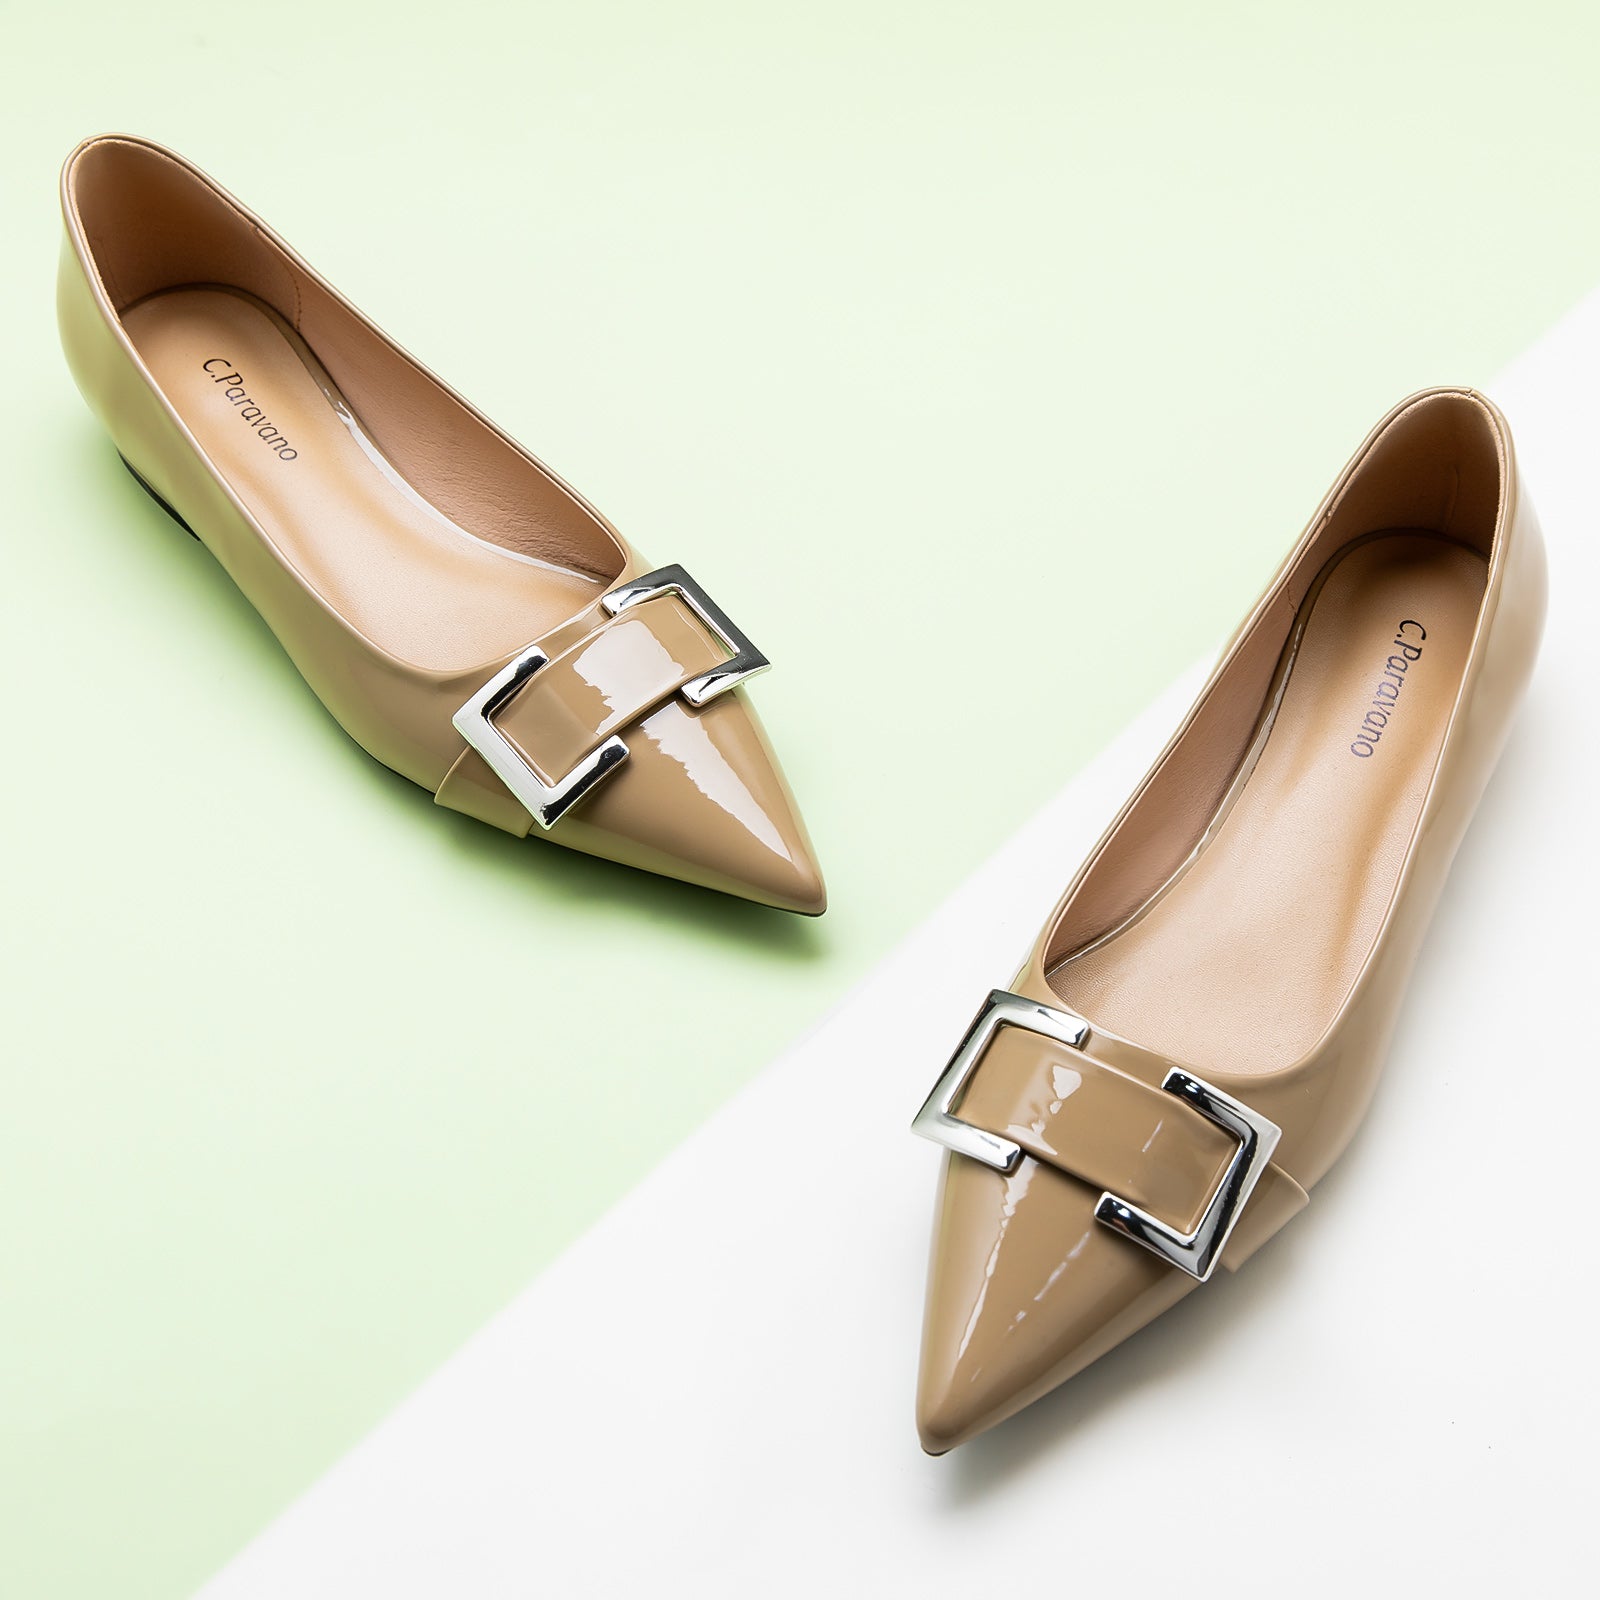  Beige Patent Leather Metal Buckle Pointed Toe Flats, a versatile and sophisticated choice for understated and timeless style